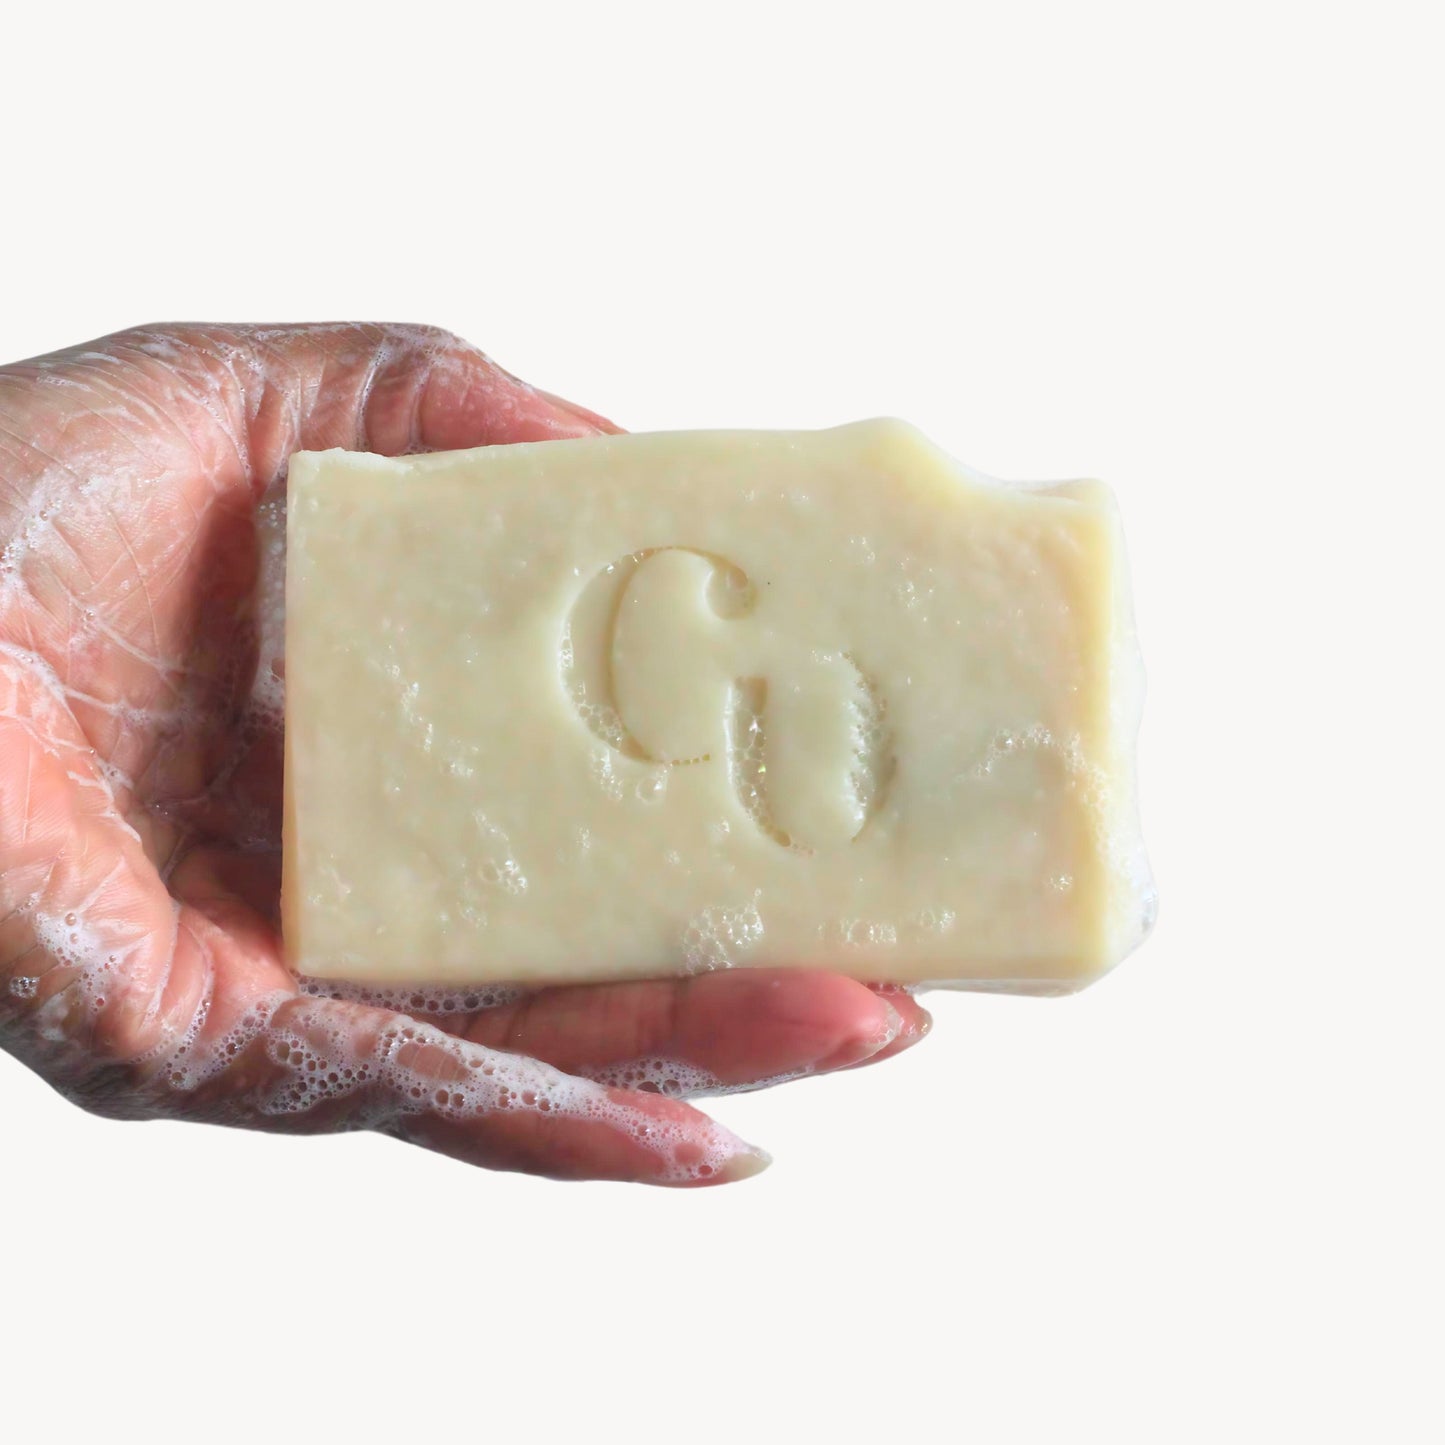 A soapy hand holding a bar of Eucalyptus + Mint soap, generating a cooling, minty lather with hints of eucalyptus Cherish U®